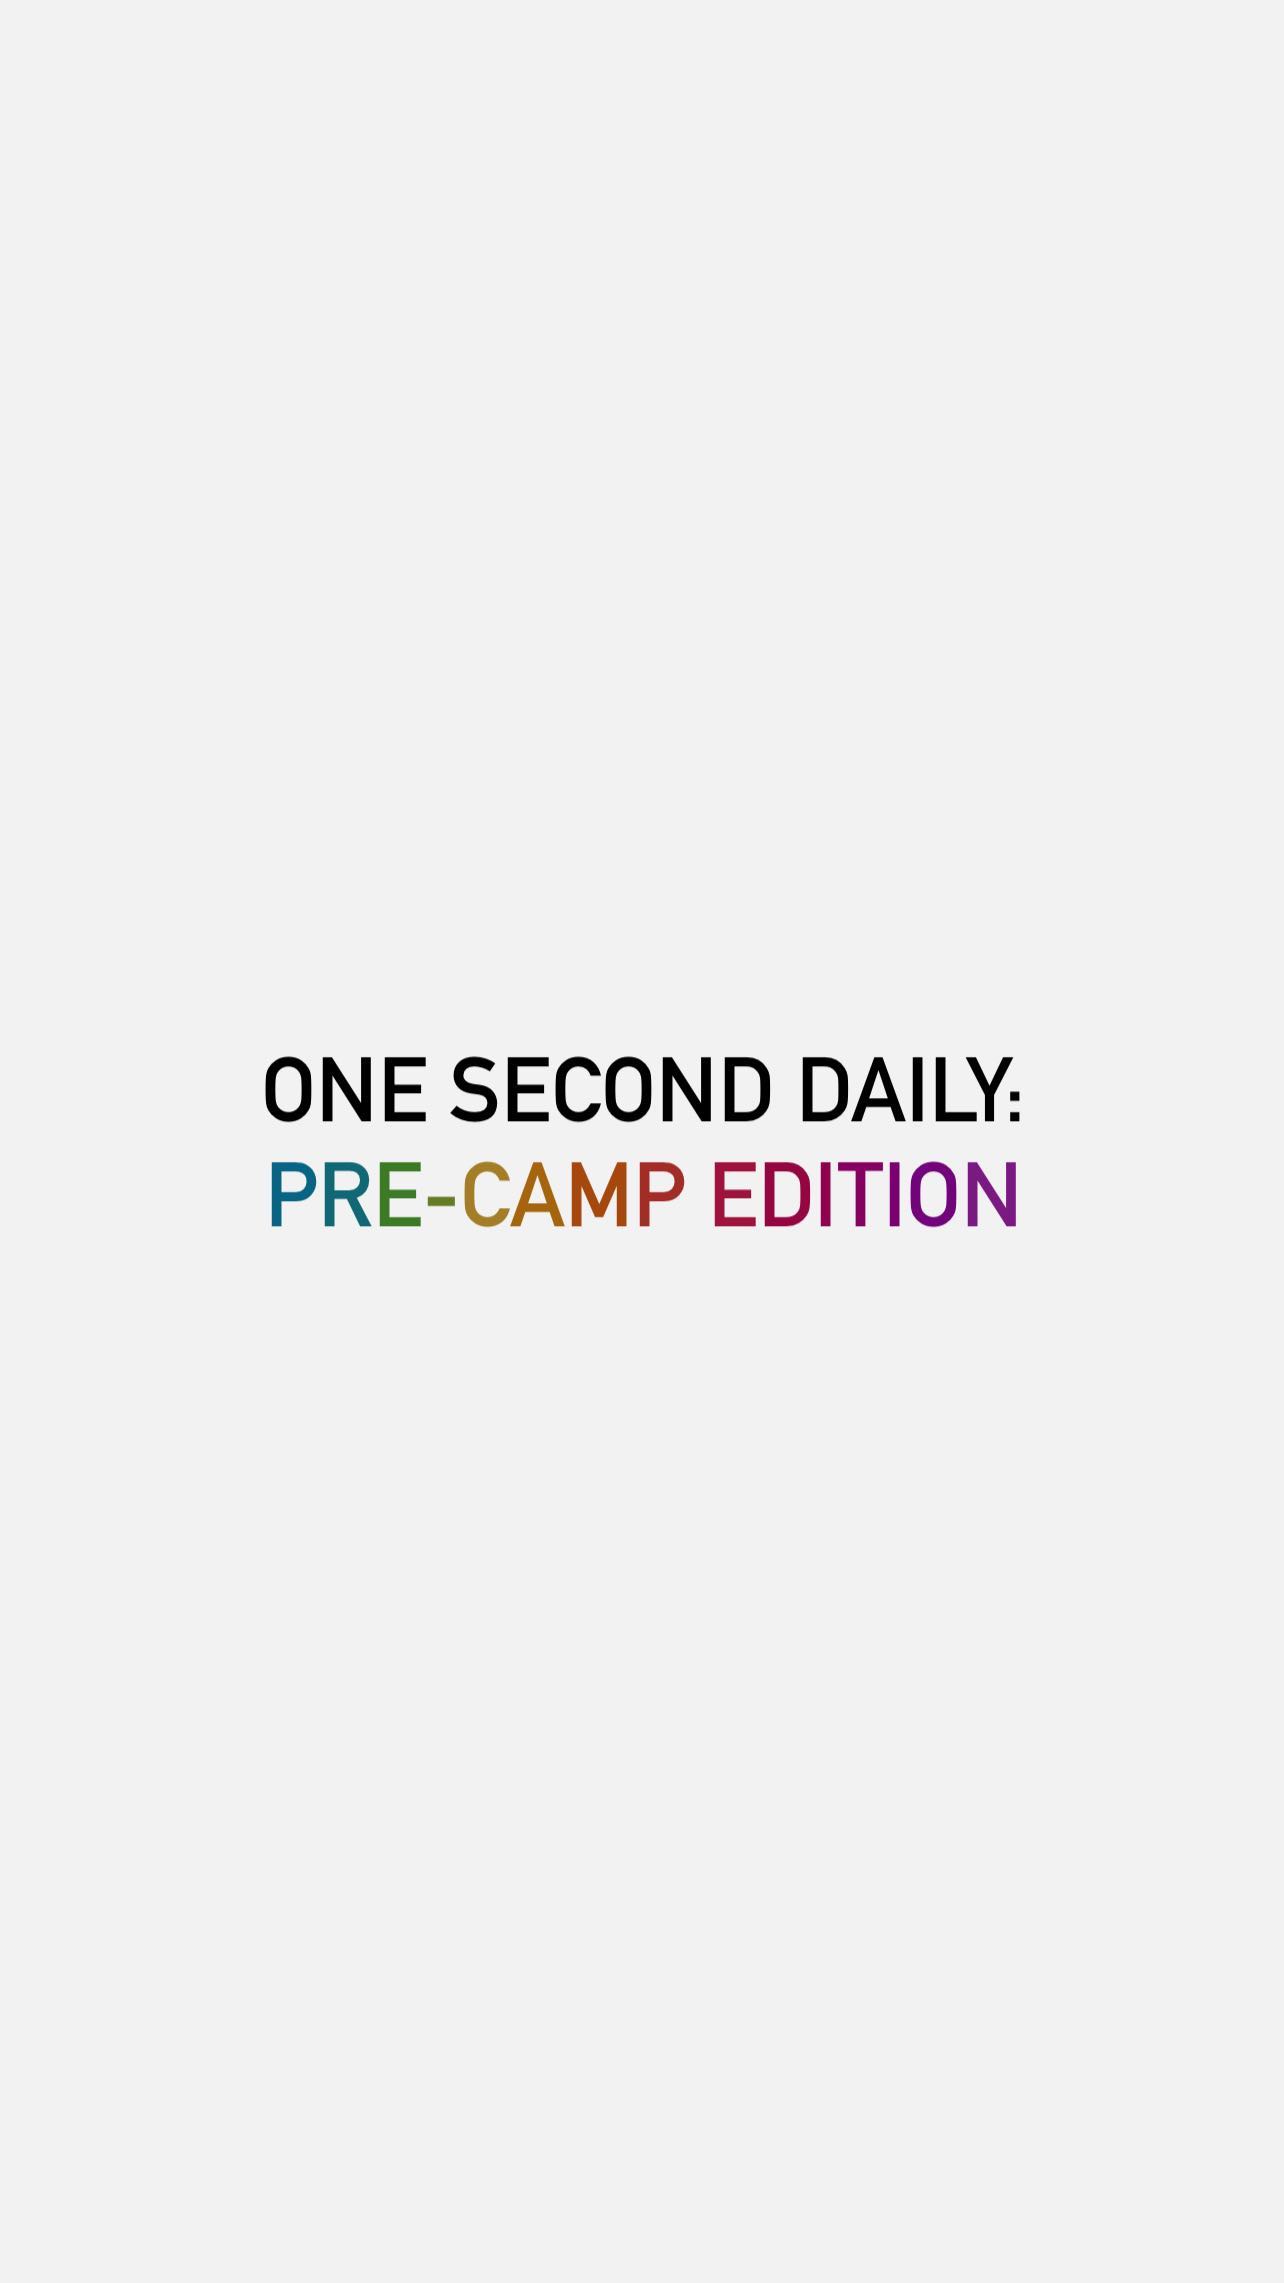 One Second Daily:
Pre-Camp Edition